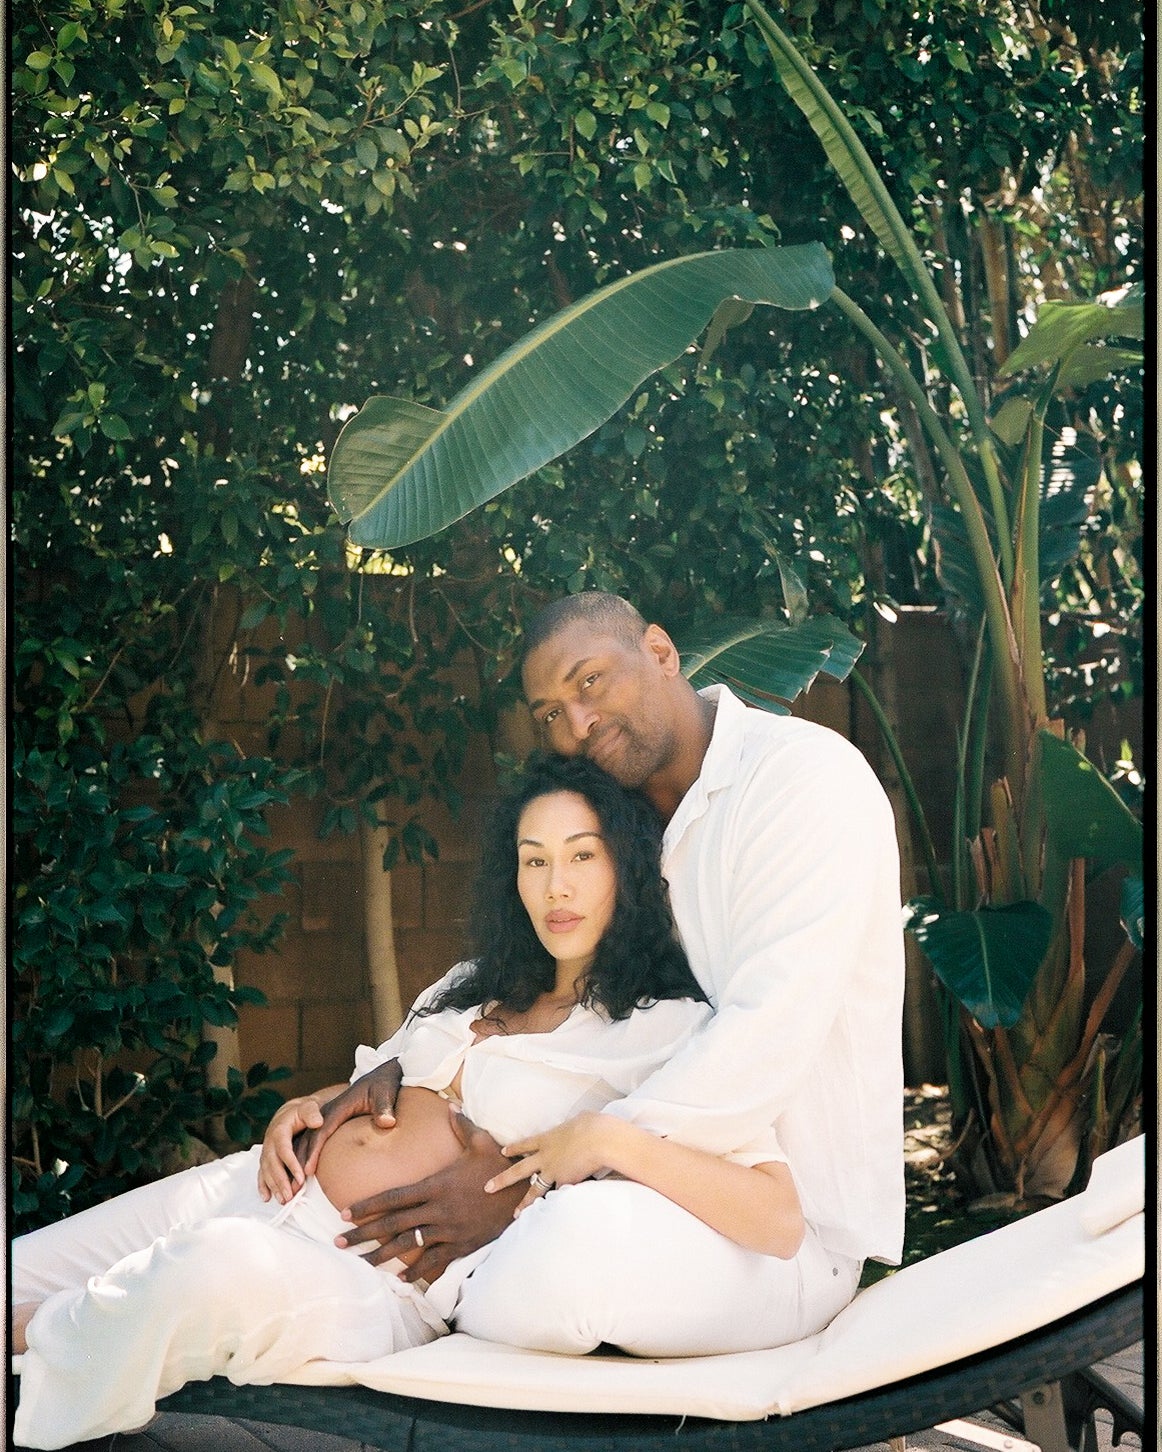 Exclusive: Former NBA Star Metta World Peace And Wife Maya Share Images From Gorgeous Maternity Shoot